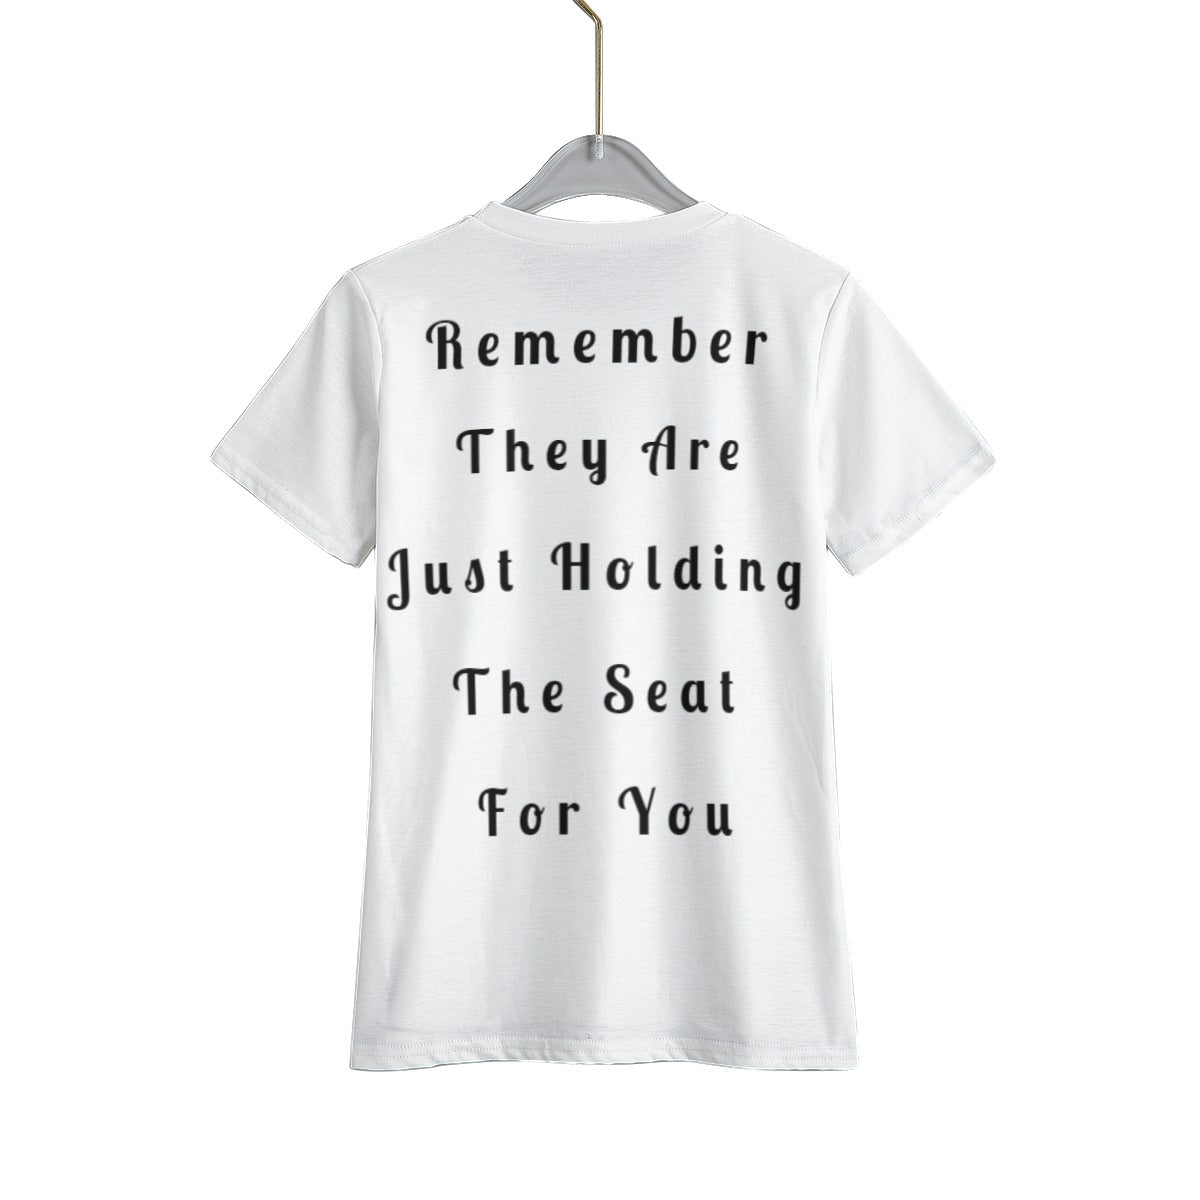 KIDS Tshirt- WORDS ABOUT KINDNESS and the Elderly- BACK VIEW